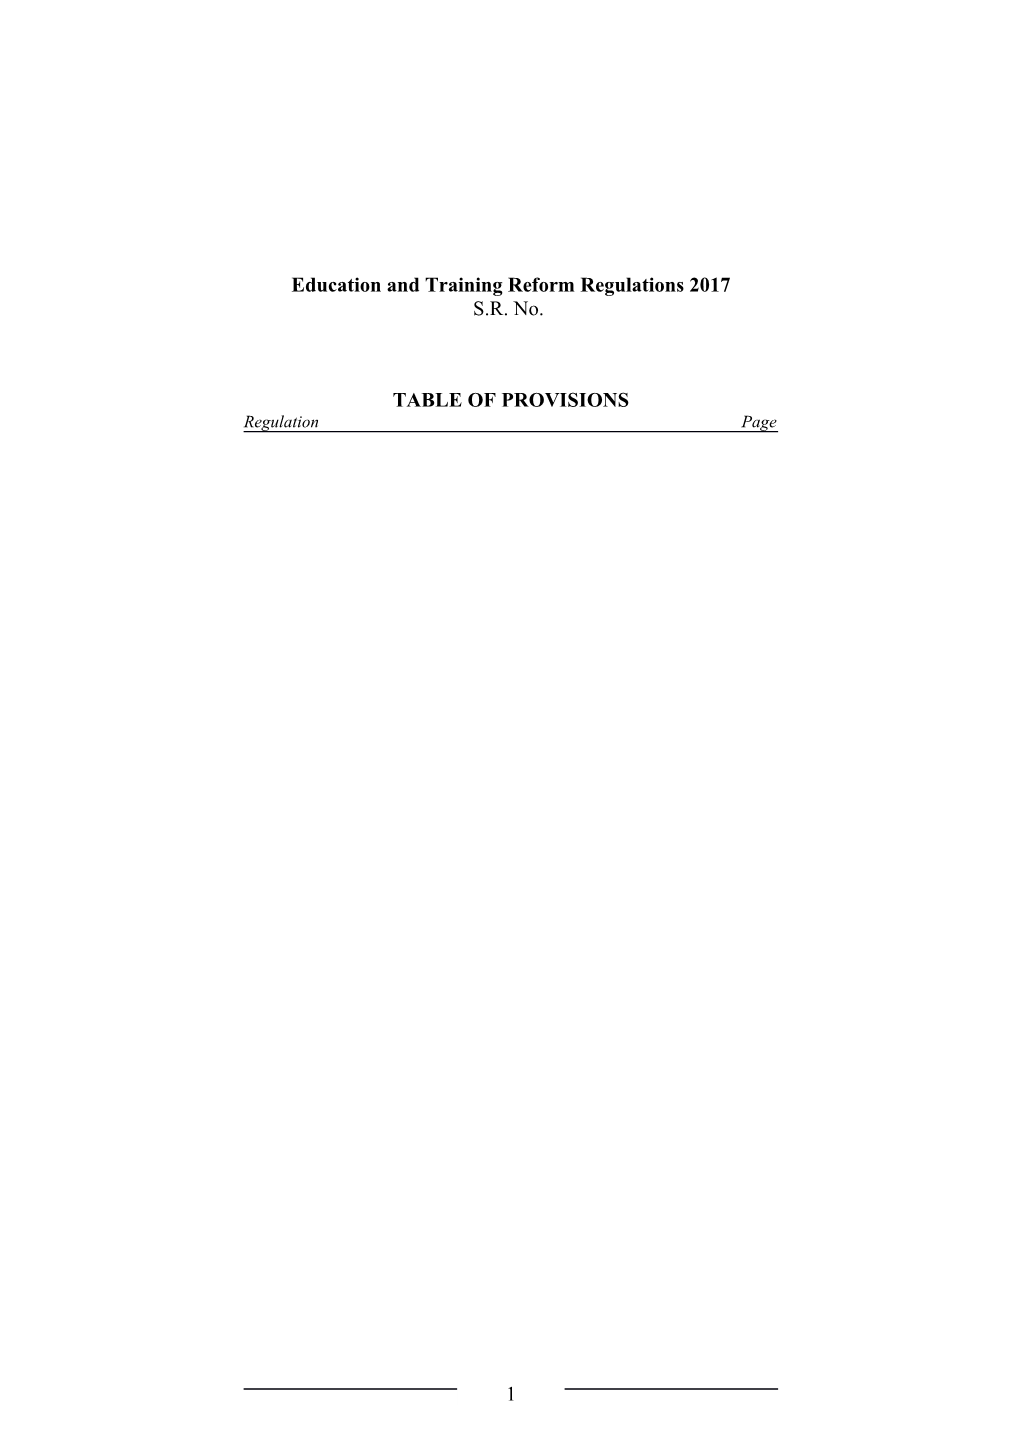 Consultation Draft of the Education and Training Reform Regulations 2017